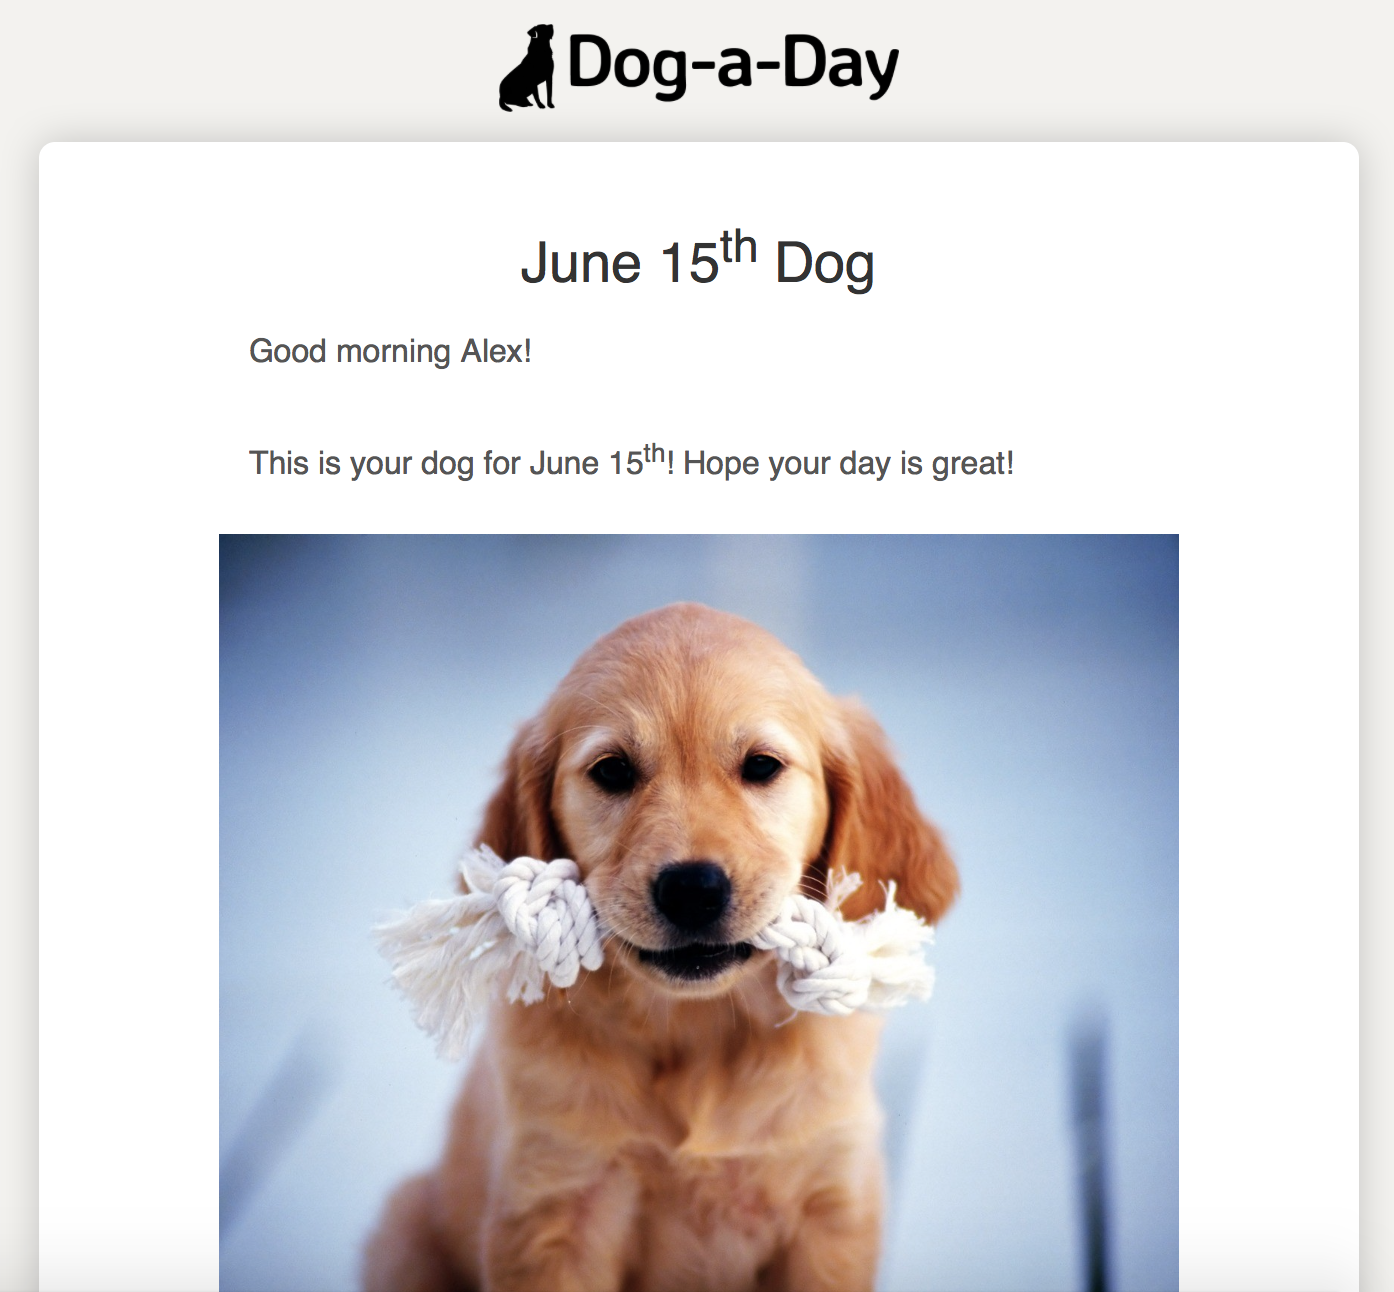 Dog-a-Day Email